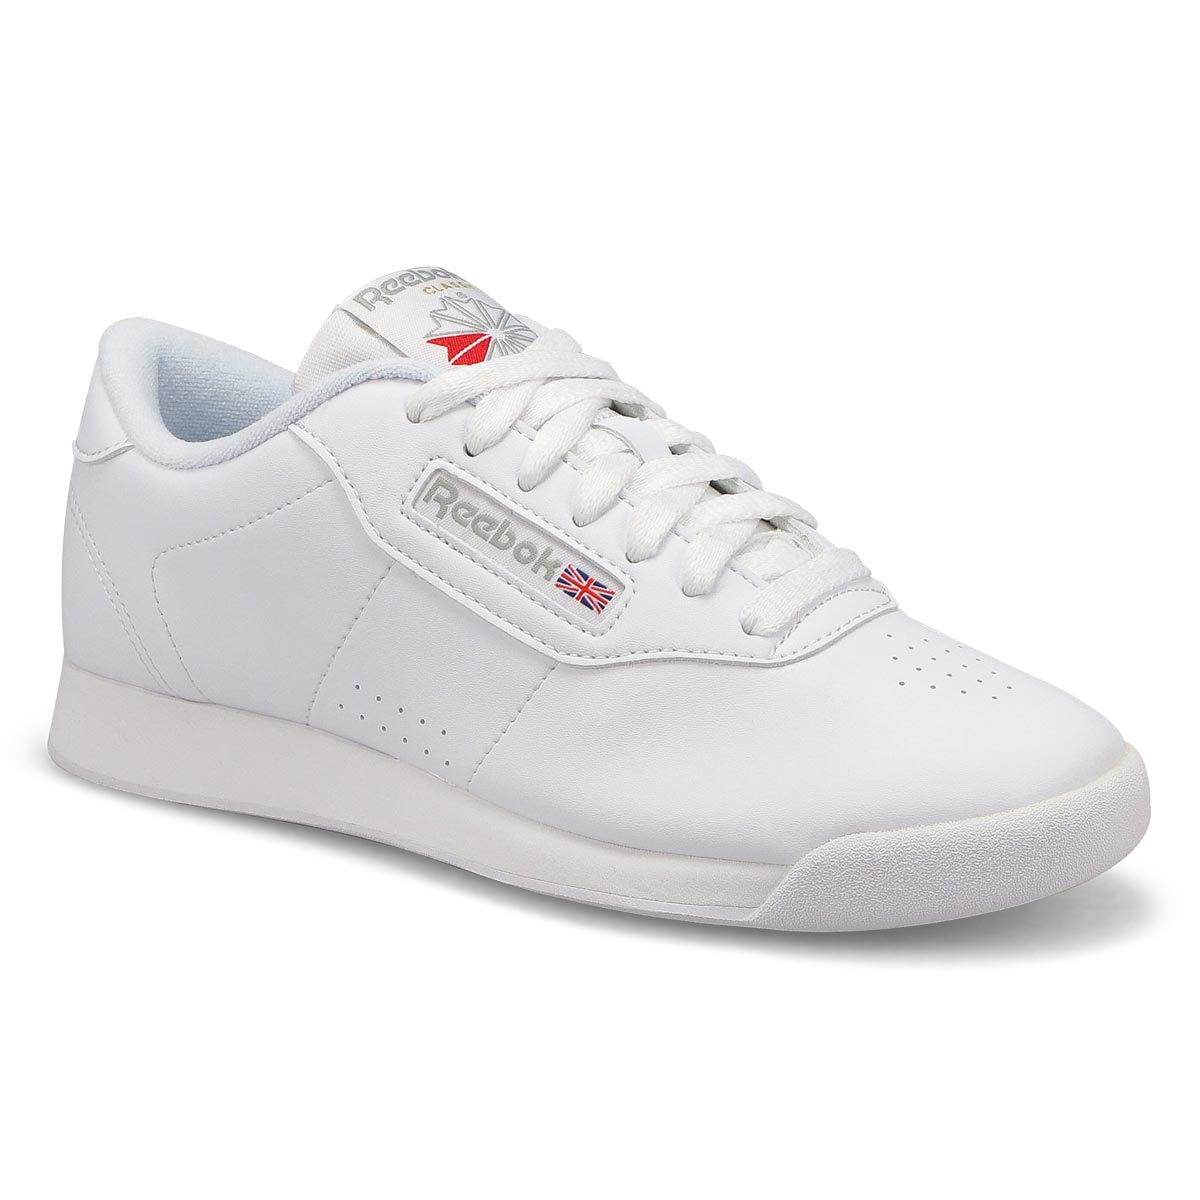 REEBOK Classic Leather Womens Shoes - WHITE